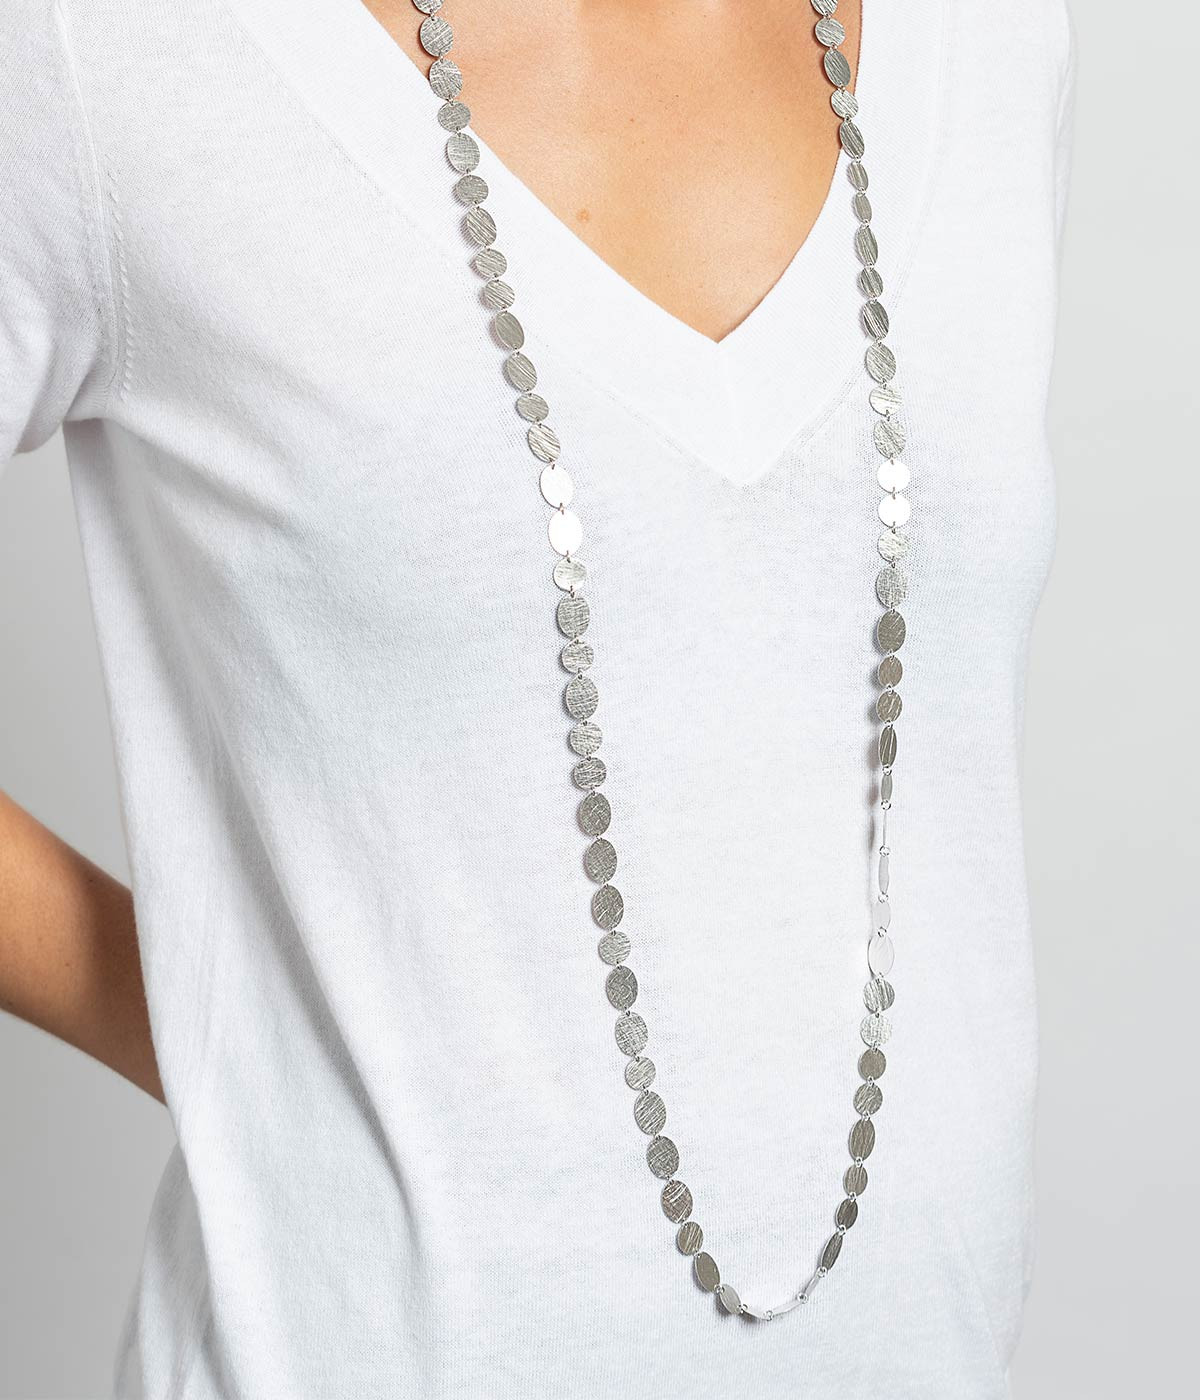 Party long silver necklace